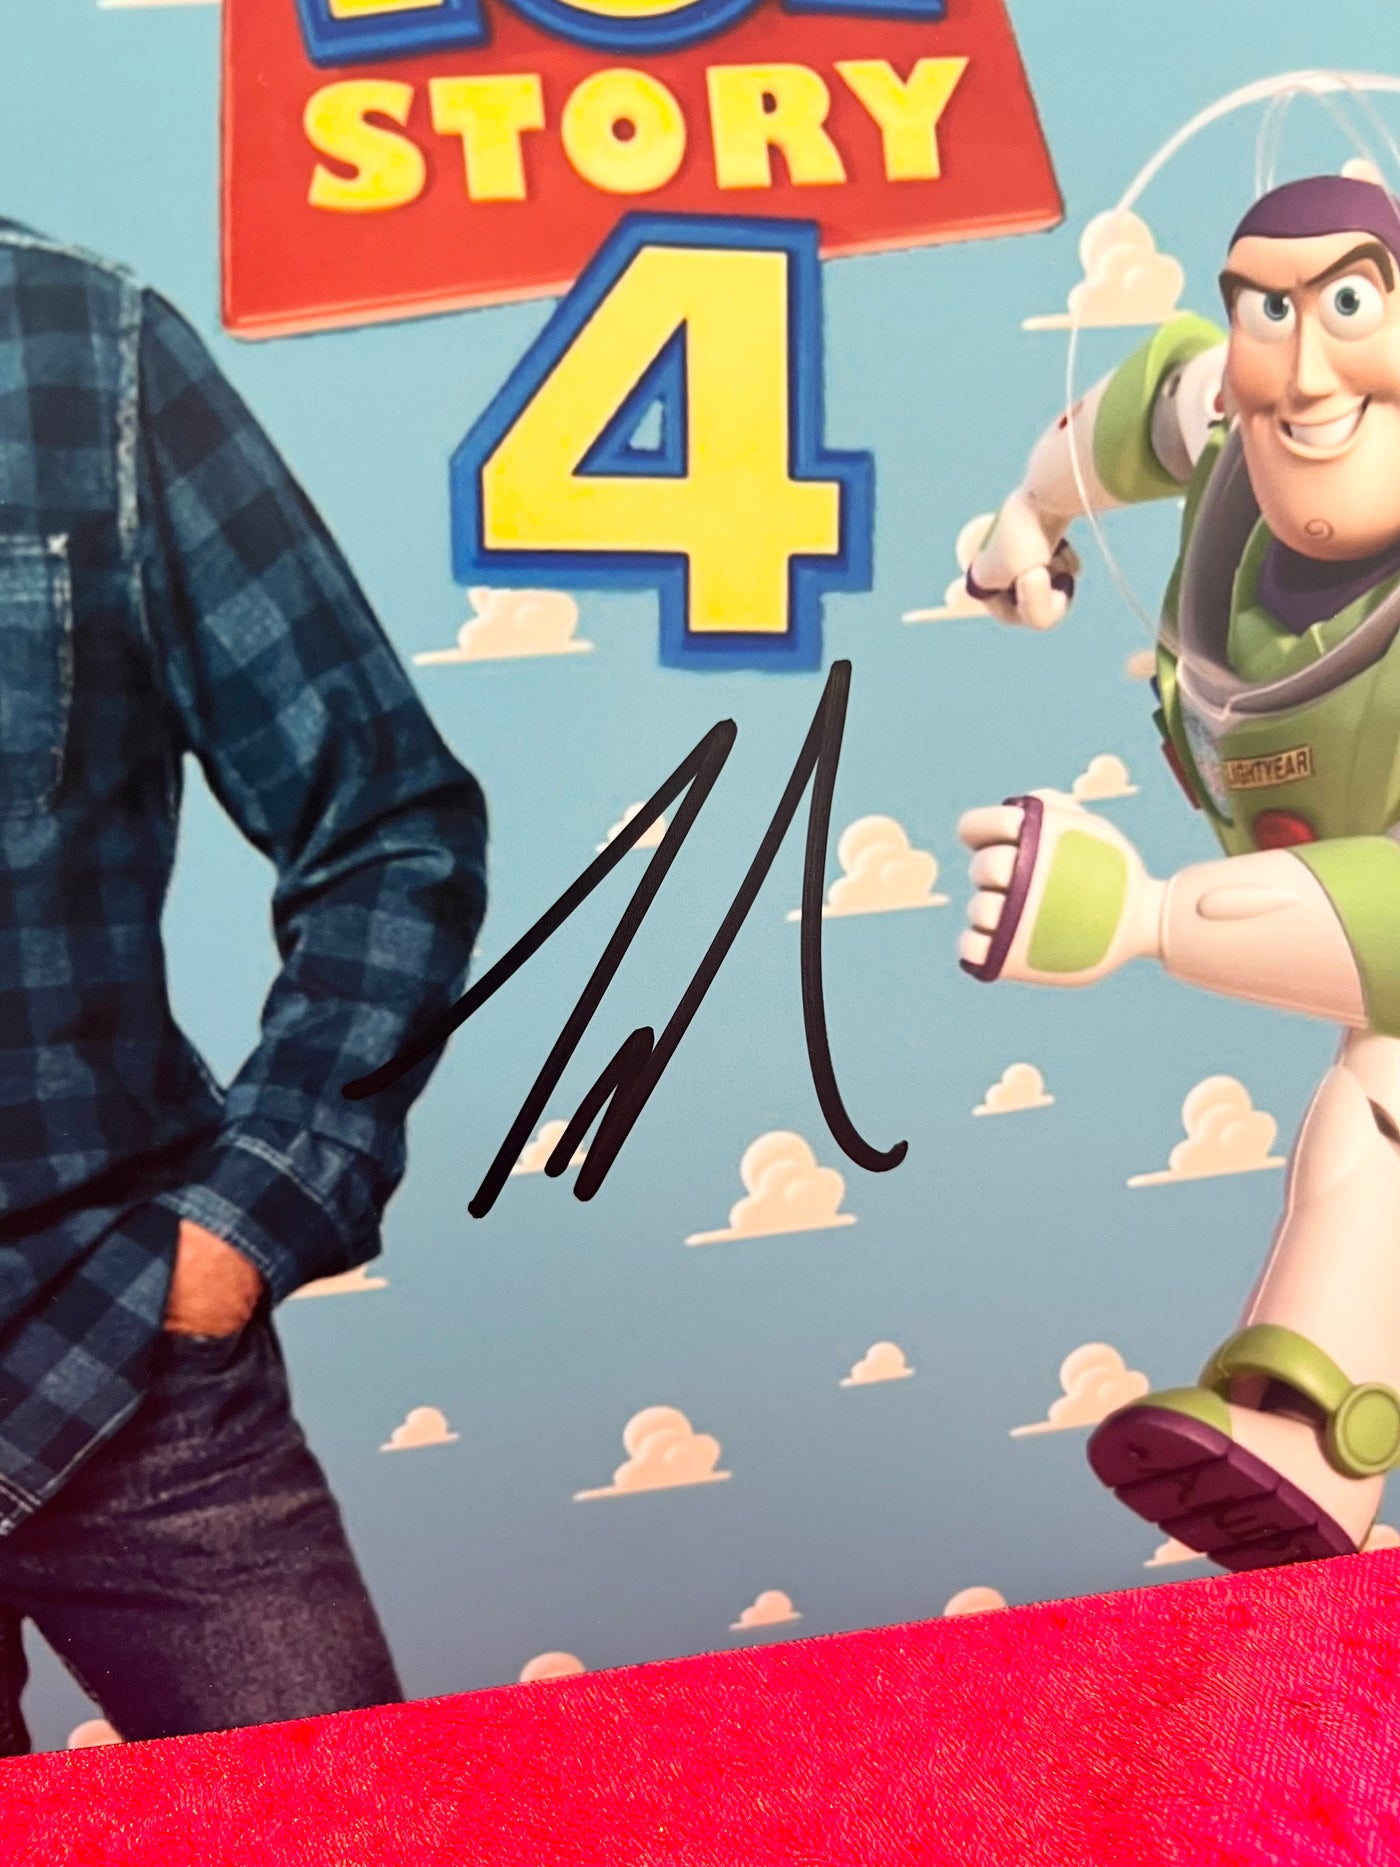 Tim Allen Signed Toy Story Photo with Full Authentication